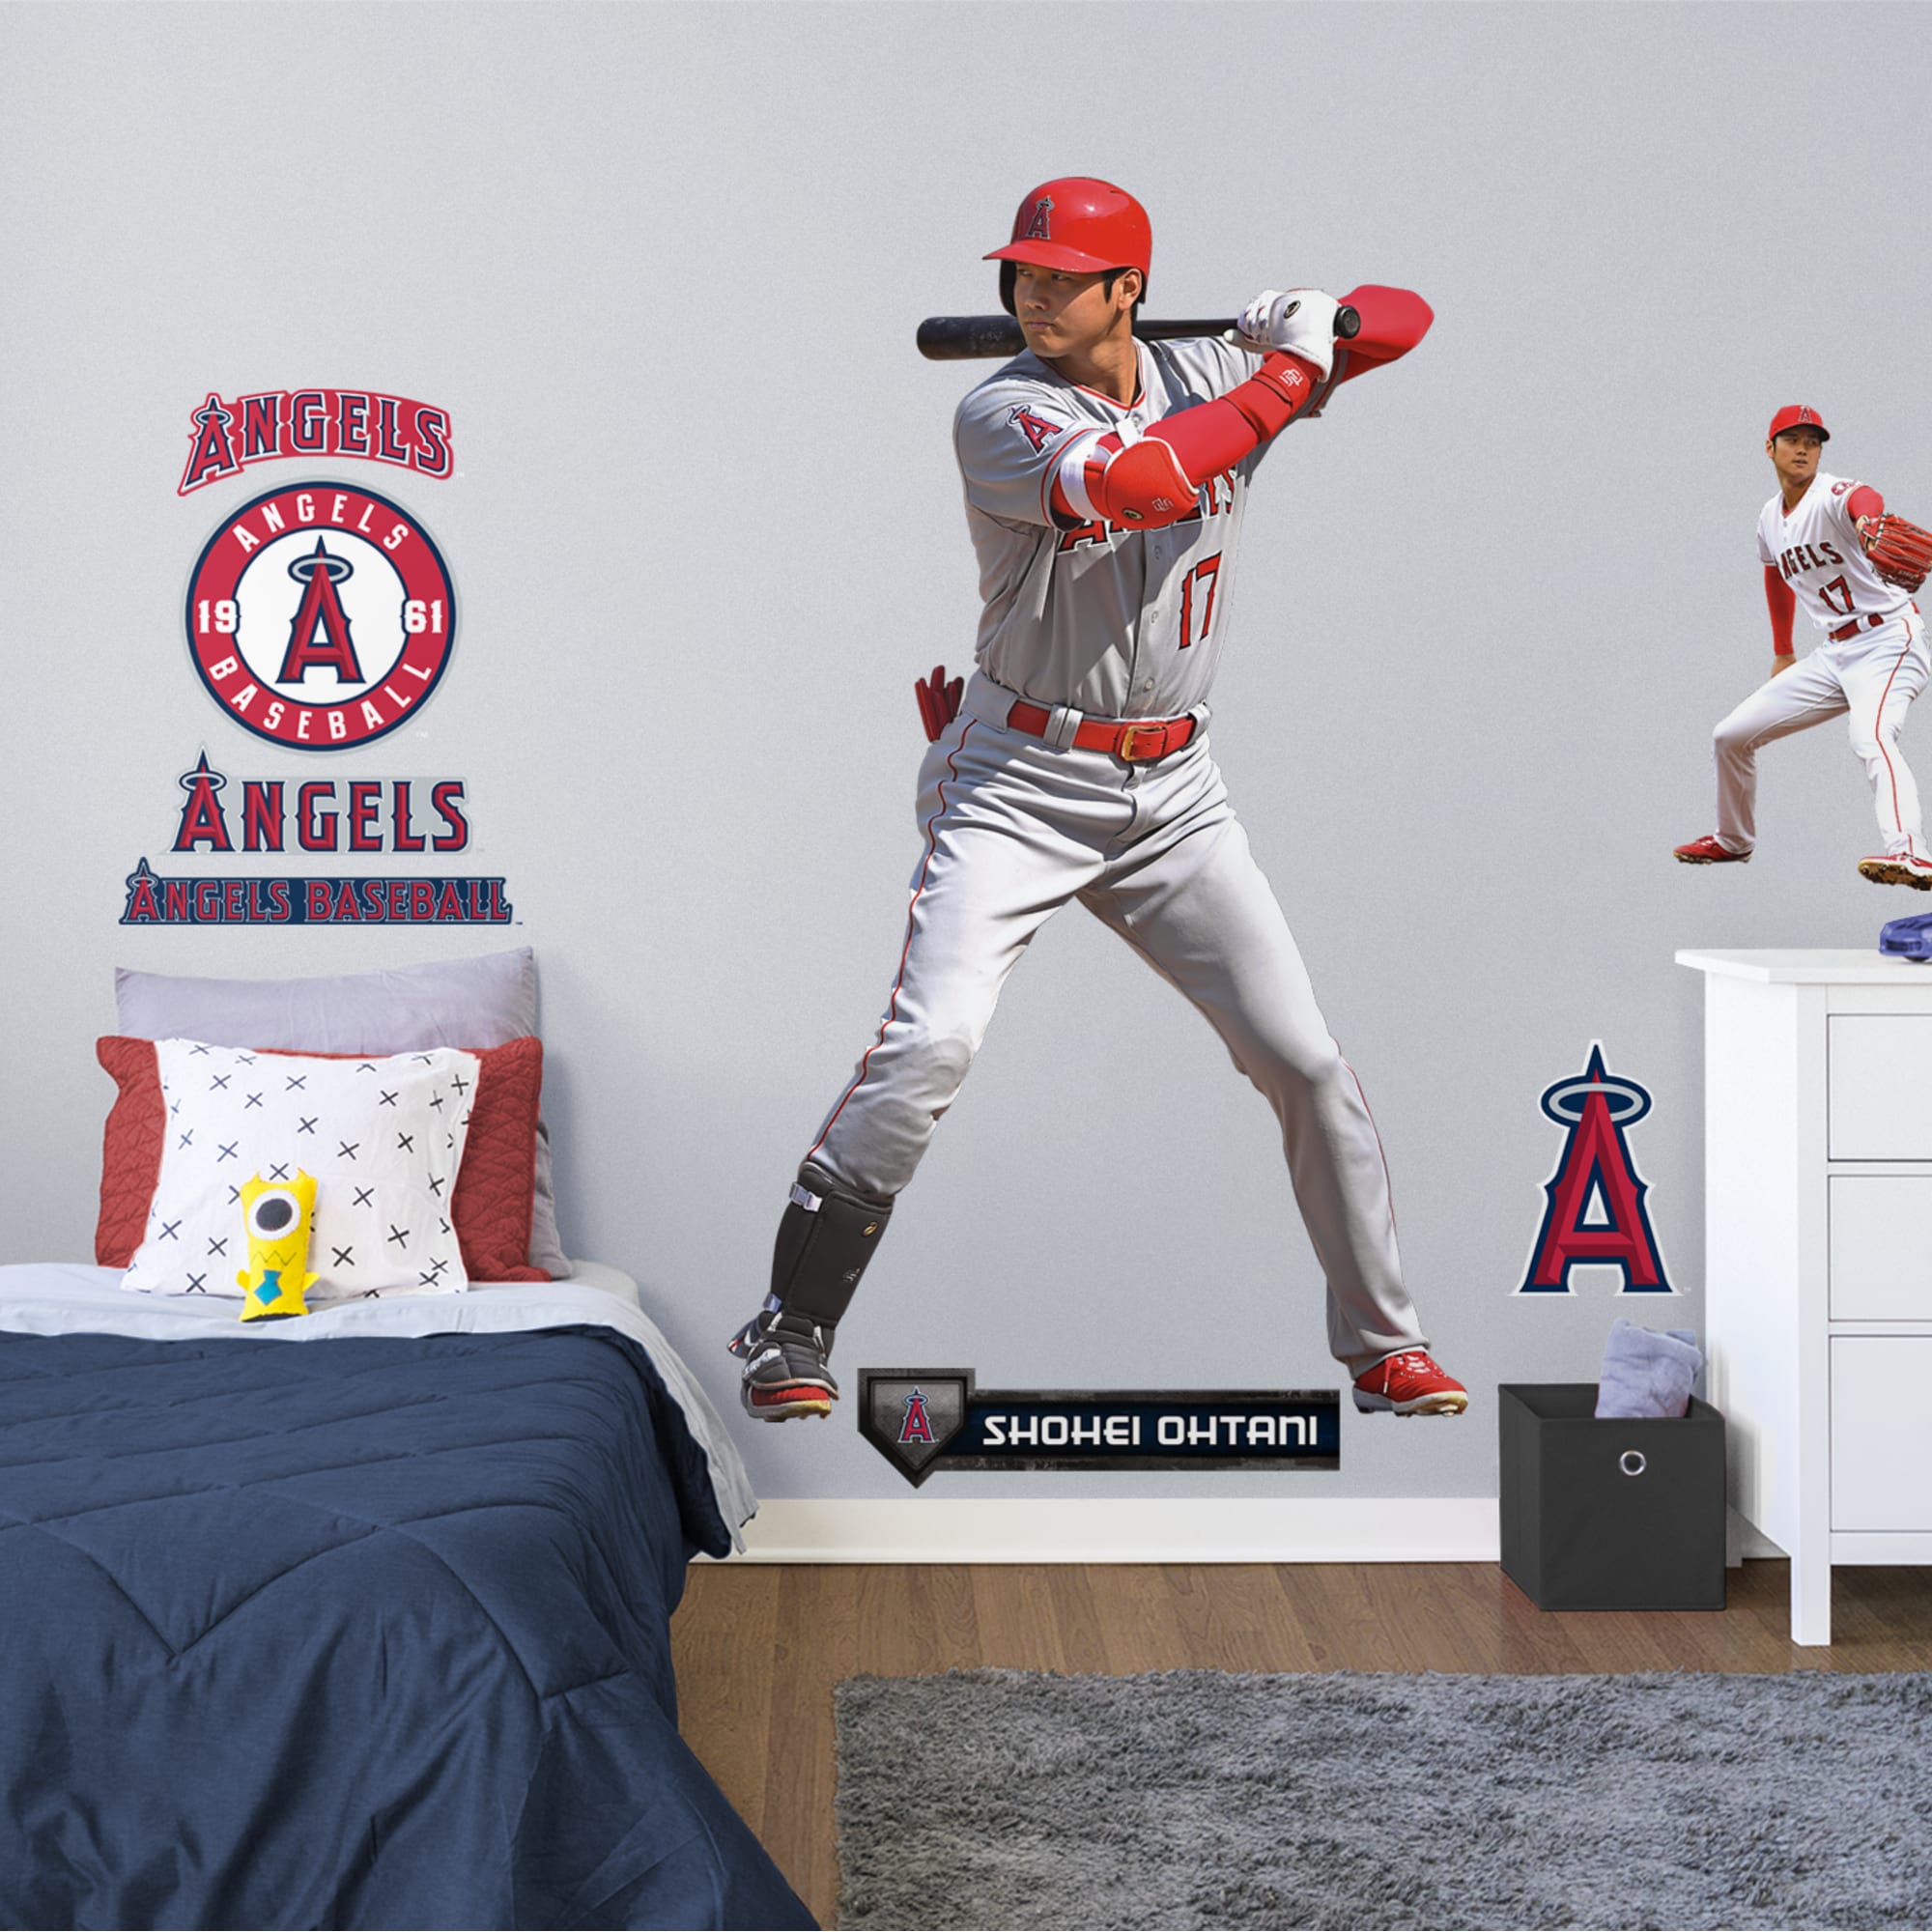 Shohei Ohtani for LA Angels: At Bat - Officially Licensed MLB Removable Wall Decal Life-Size Athlete + 12 Decals (46"W x 78"H) b